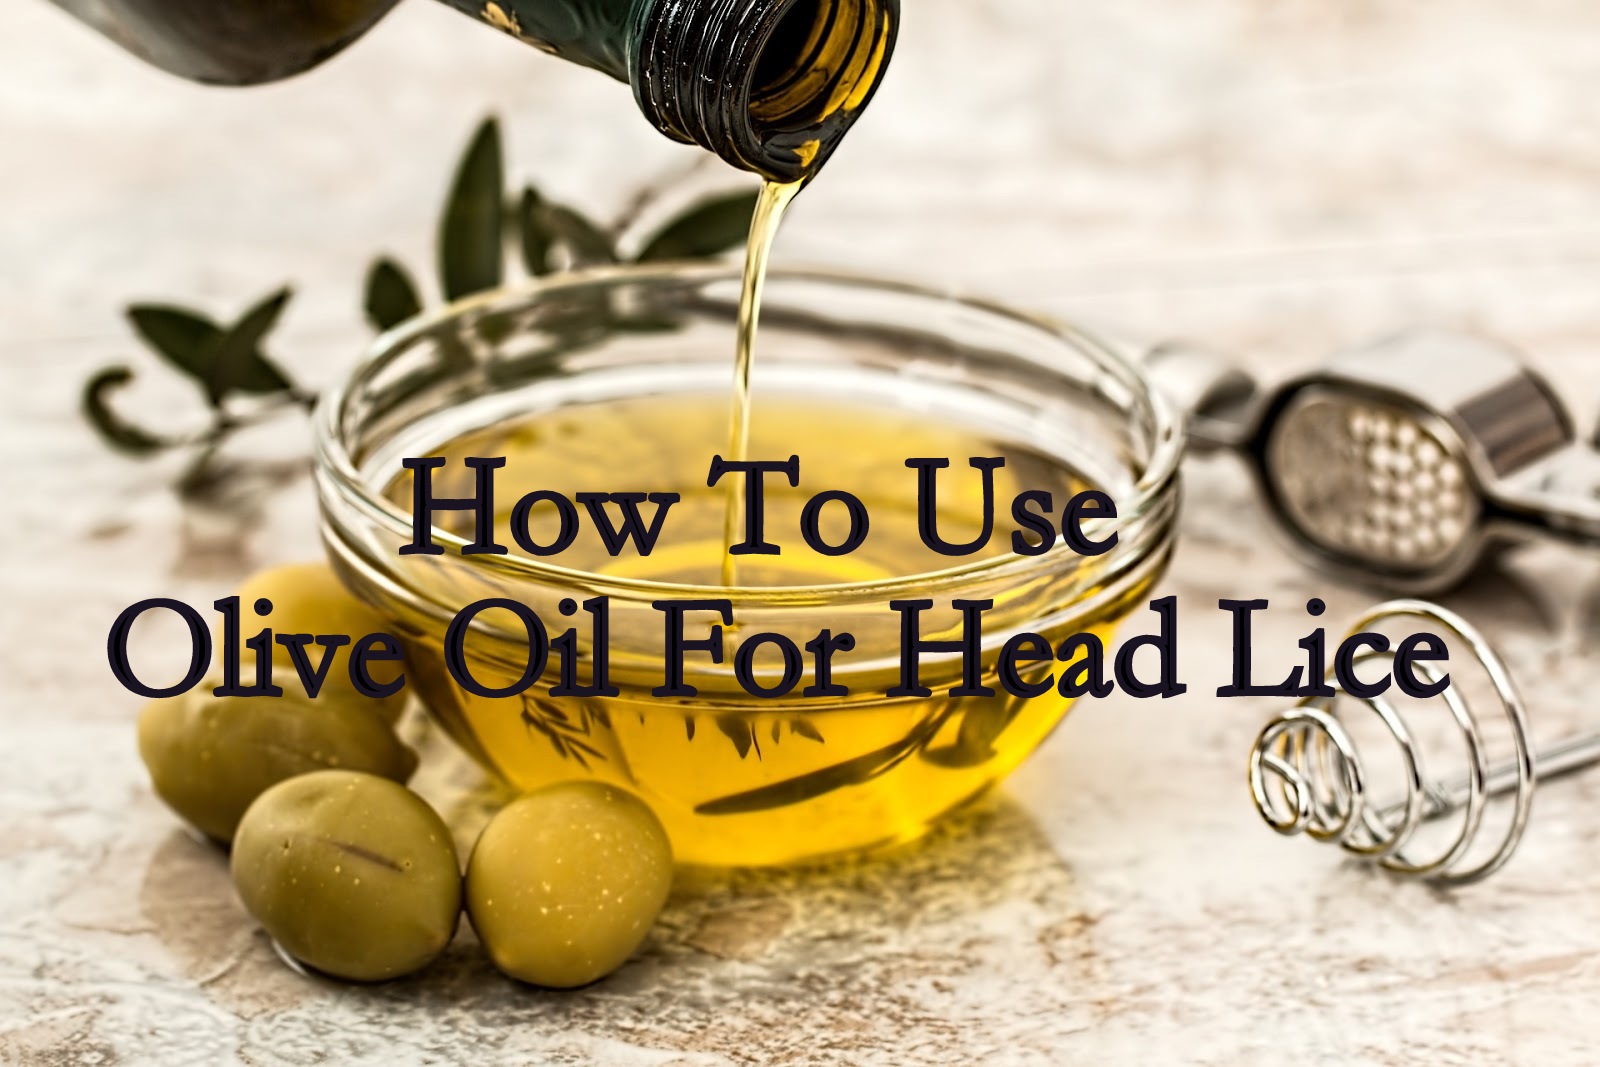  What you need and how to use olive oil for head lice How To Use Olive Oil For Head Lice